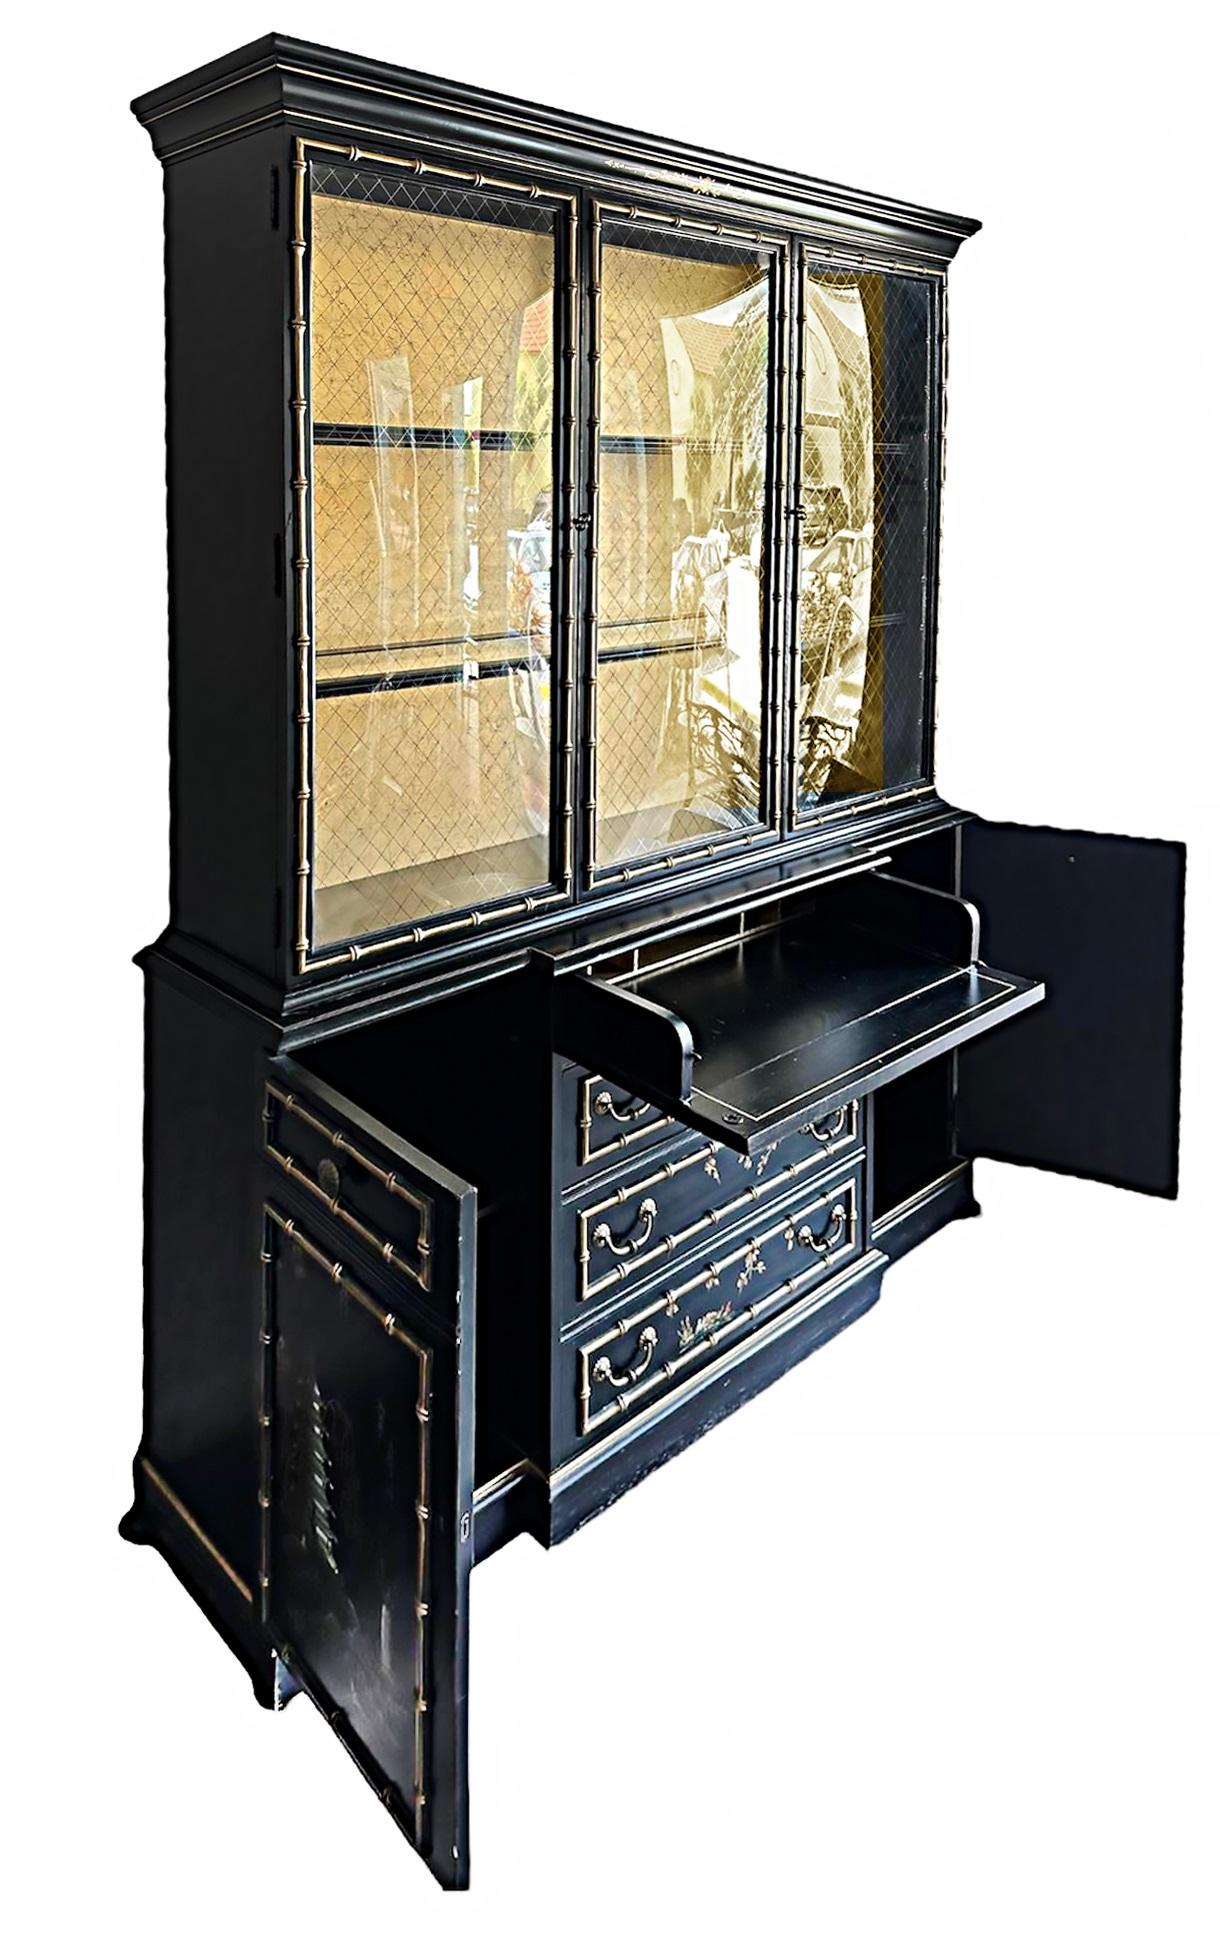 Jasper Chinoiserie Breakfront Secretary, Gilt Lacquer, Bubble Glass 

Offered for sale is a Chinoiserie breakfront china cabinet by Jasper with bubble glass panels. The cabinet is adorned with all-over Chinoiserie paint decoration. The center